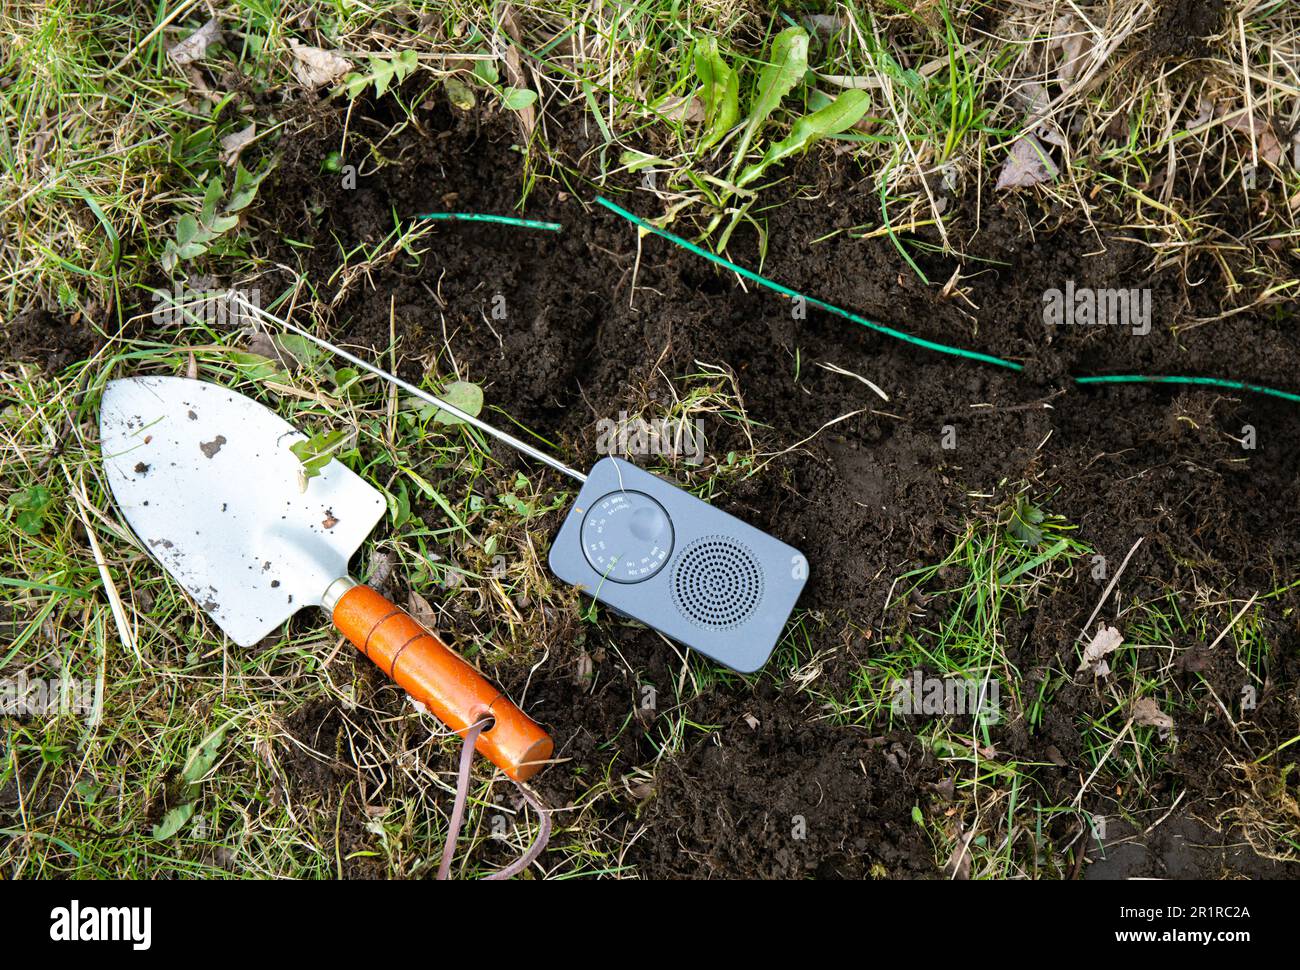 How do you find a break in a robotic mower perimeter wire. Using small hand held battery operated AM radio interference signal to locate broken part . Stock Photo